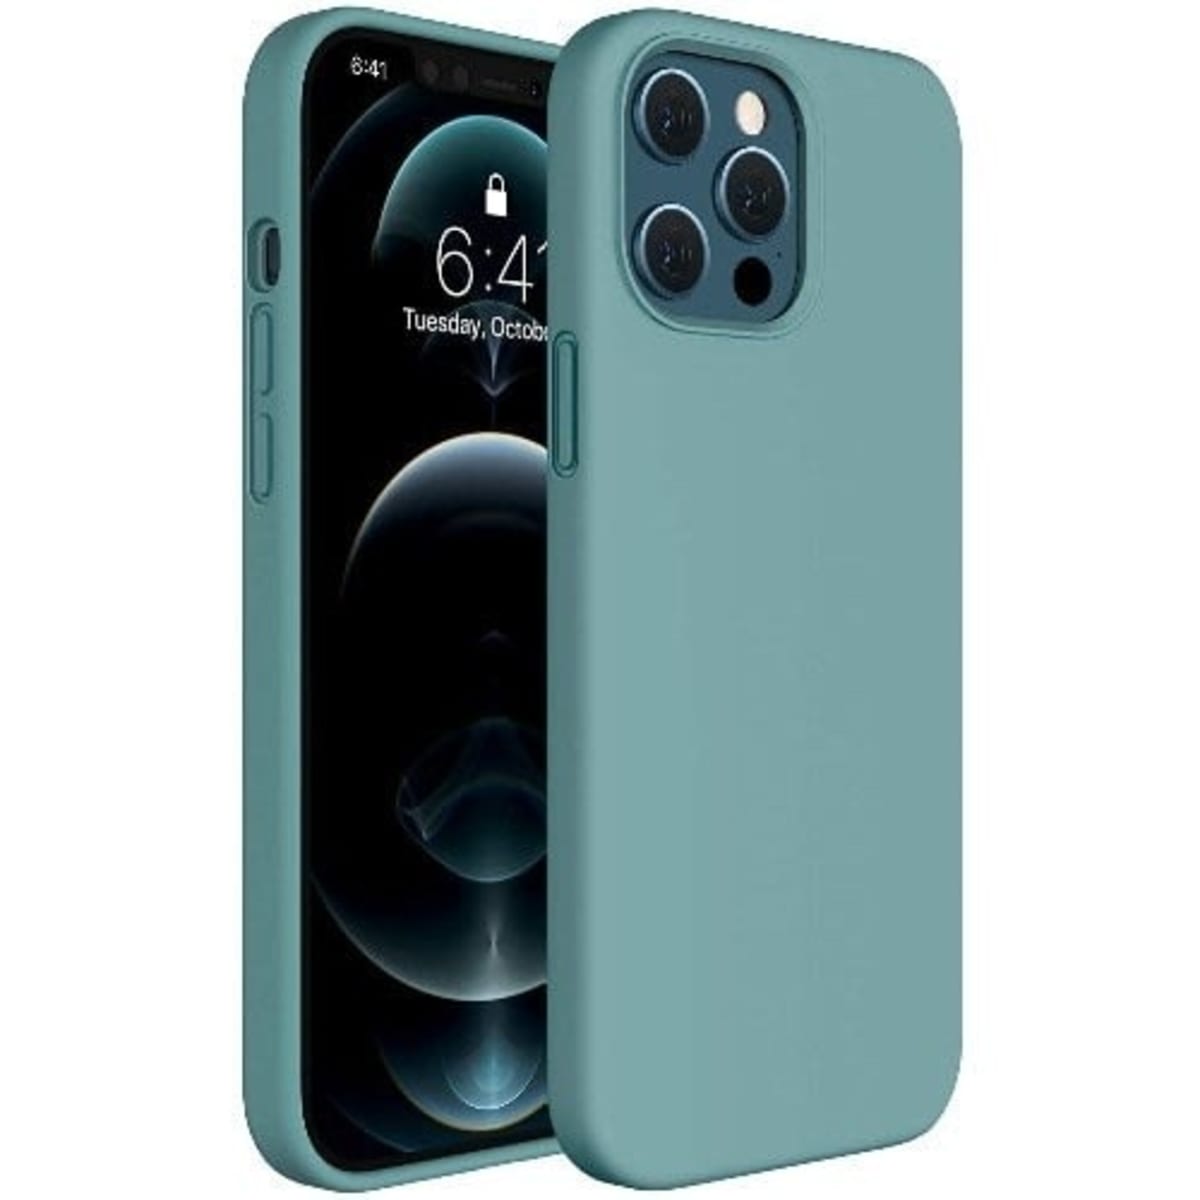 Back Case For iPhone 11 Pro Max